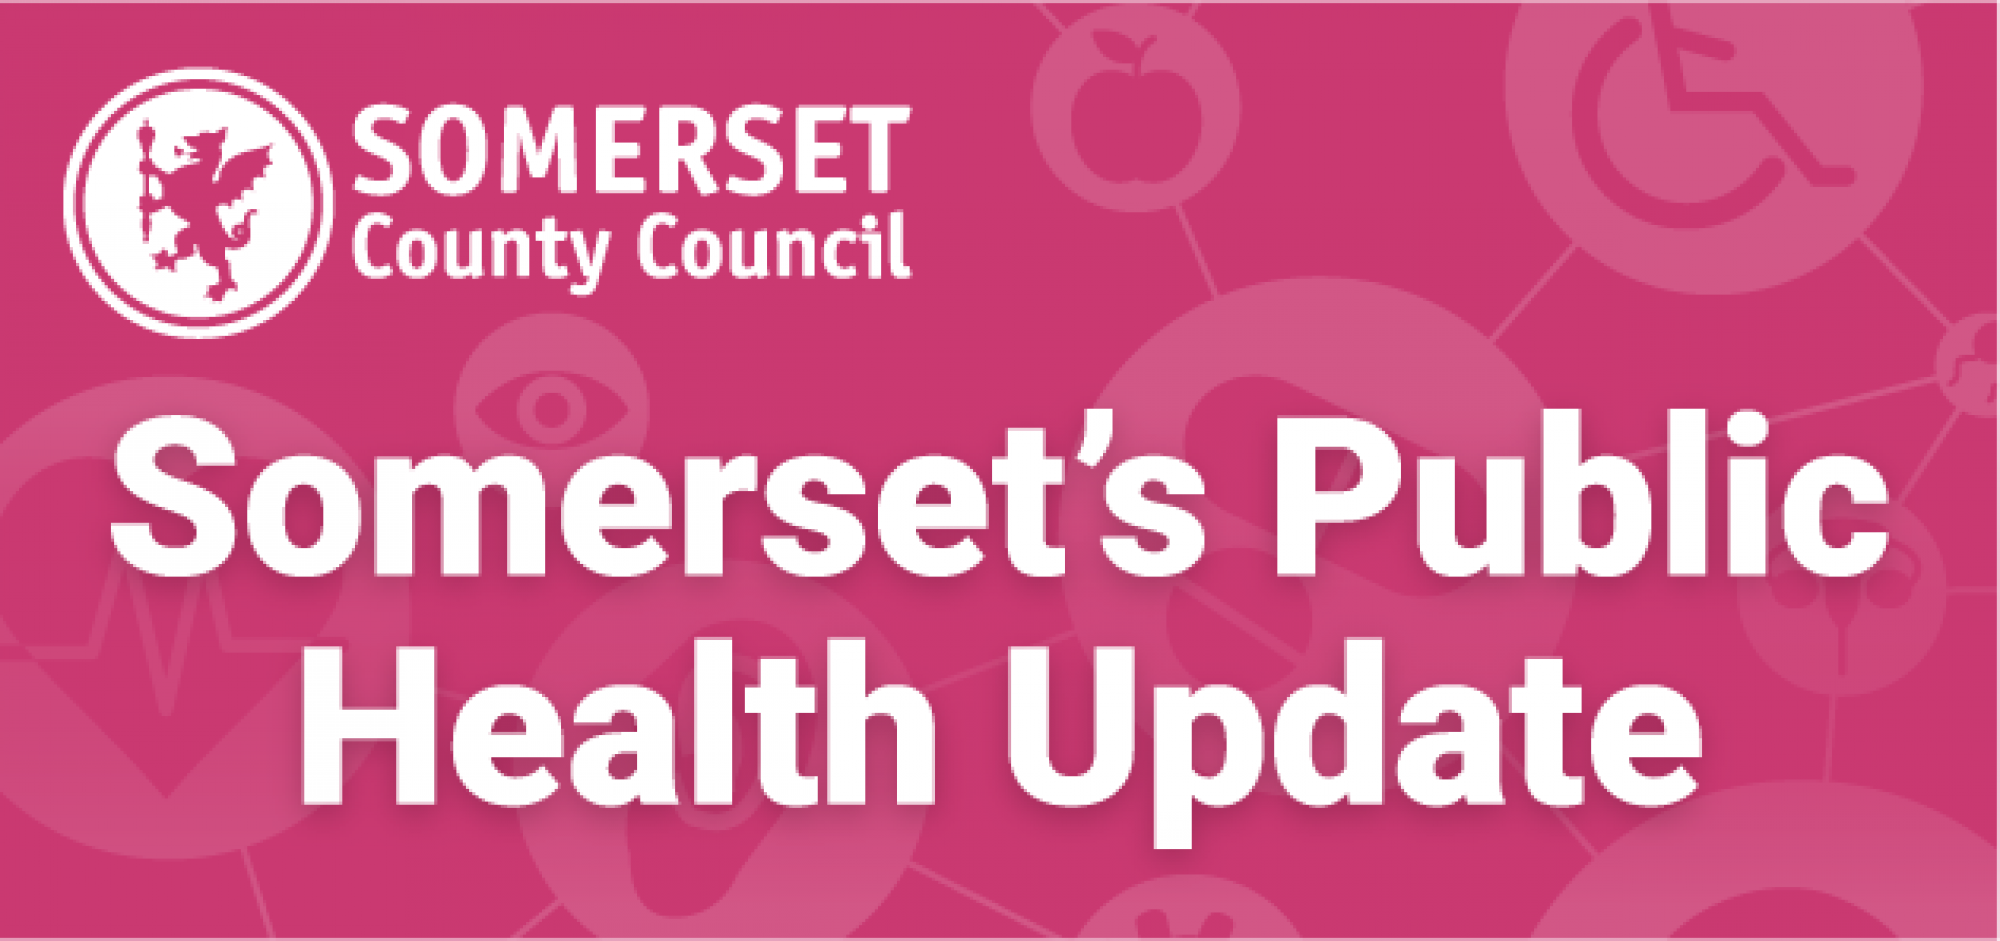 Public Health Update - 27 May